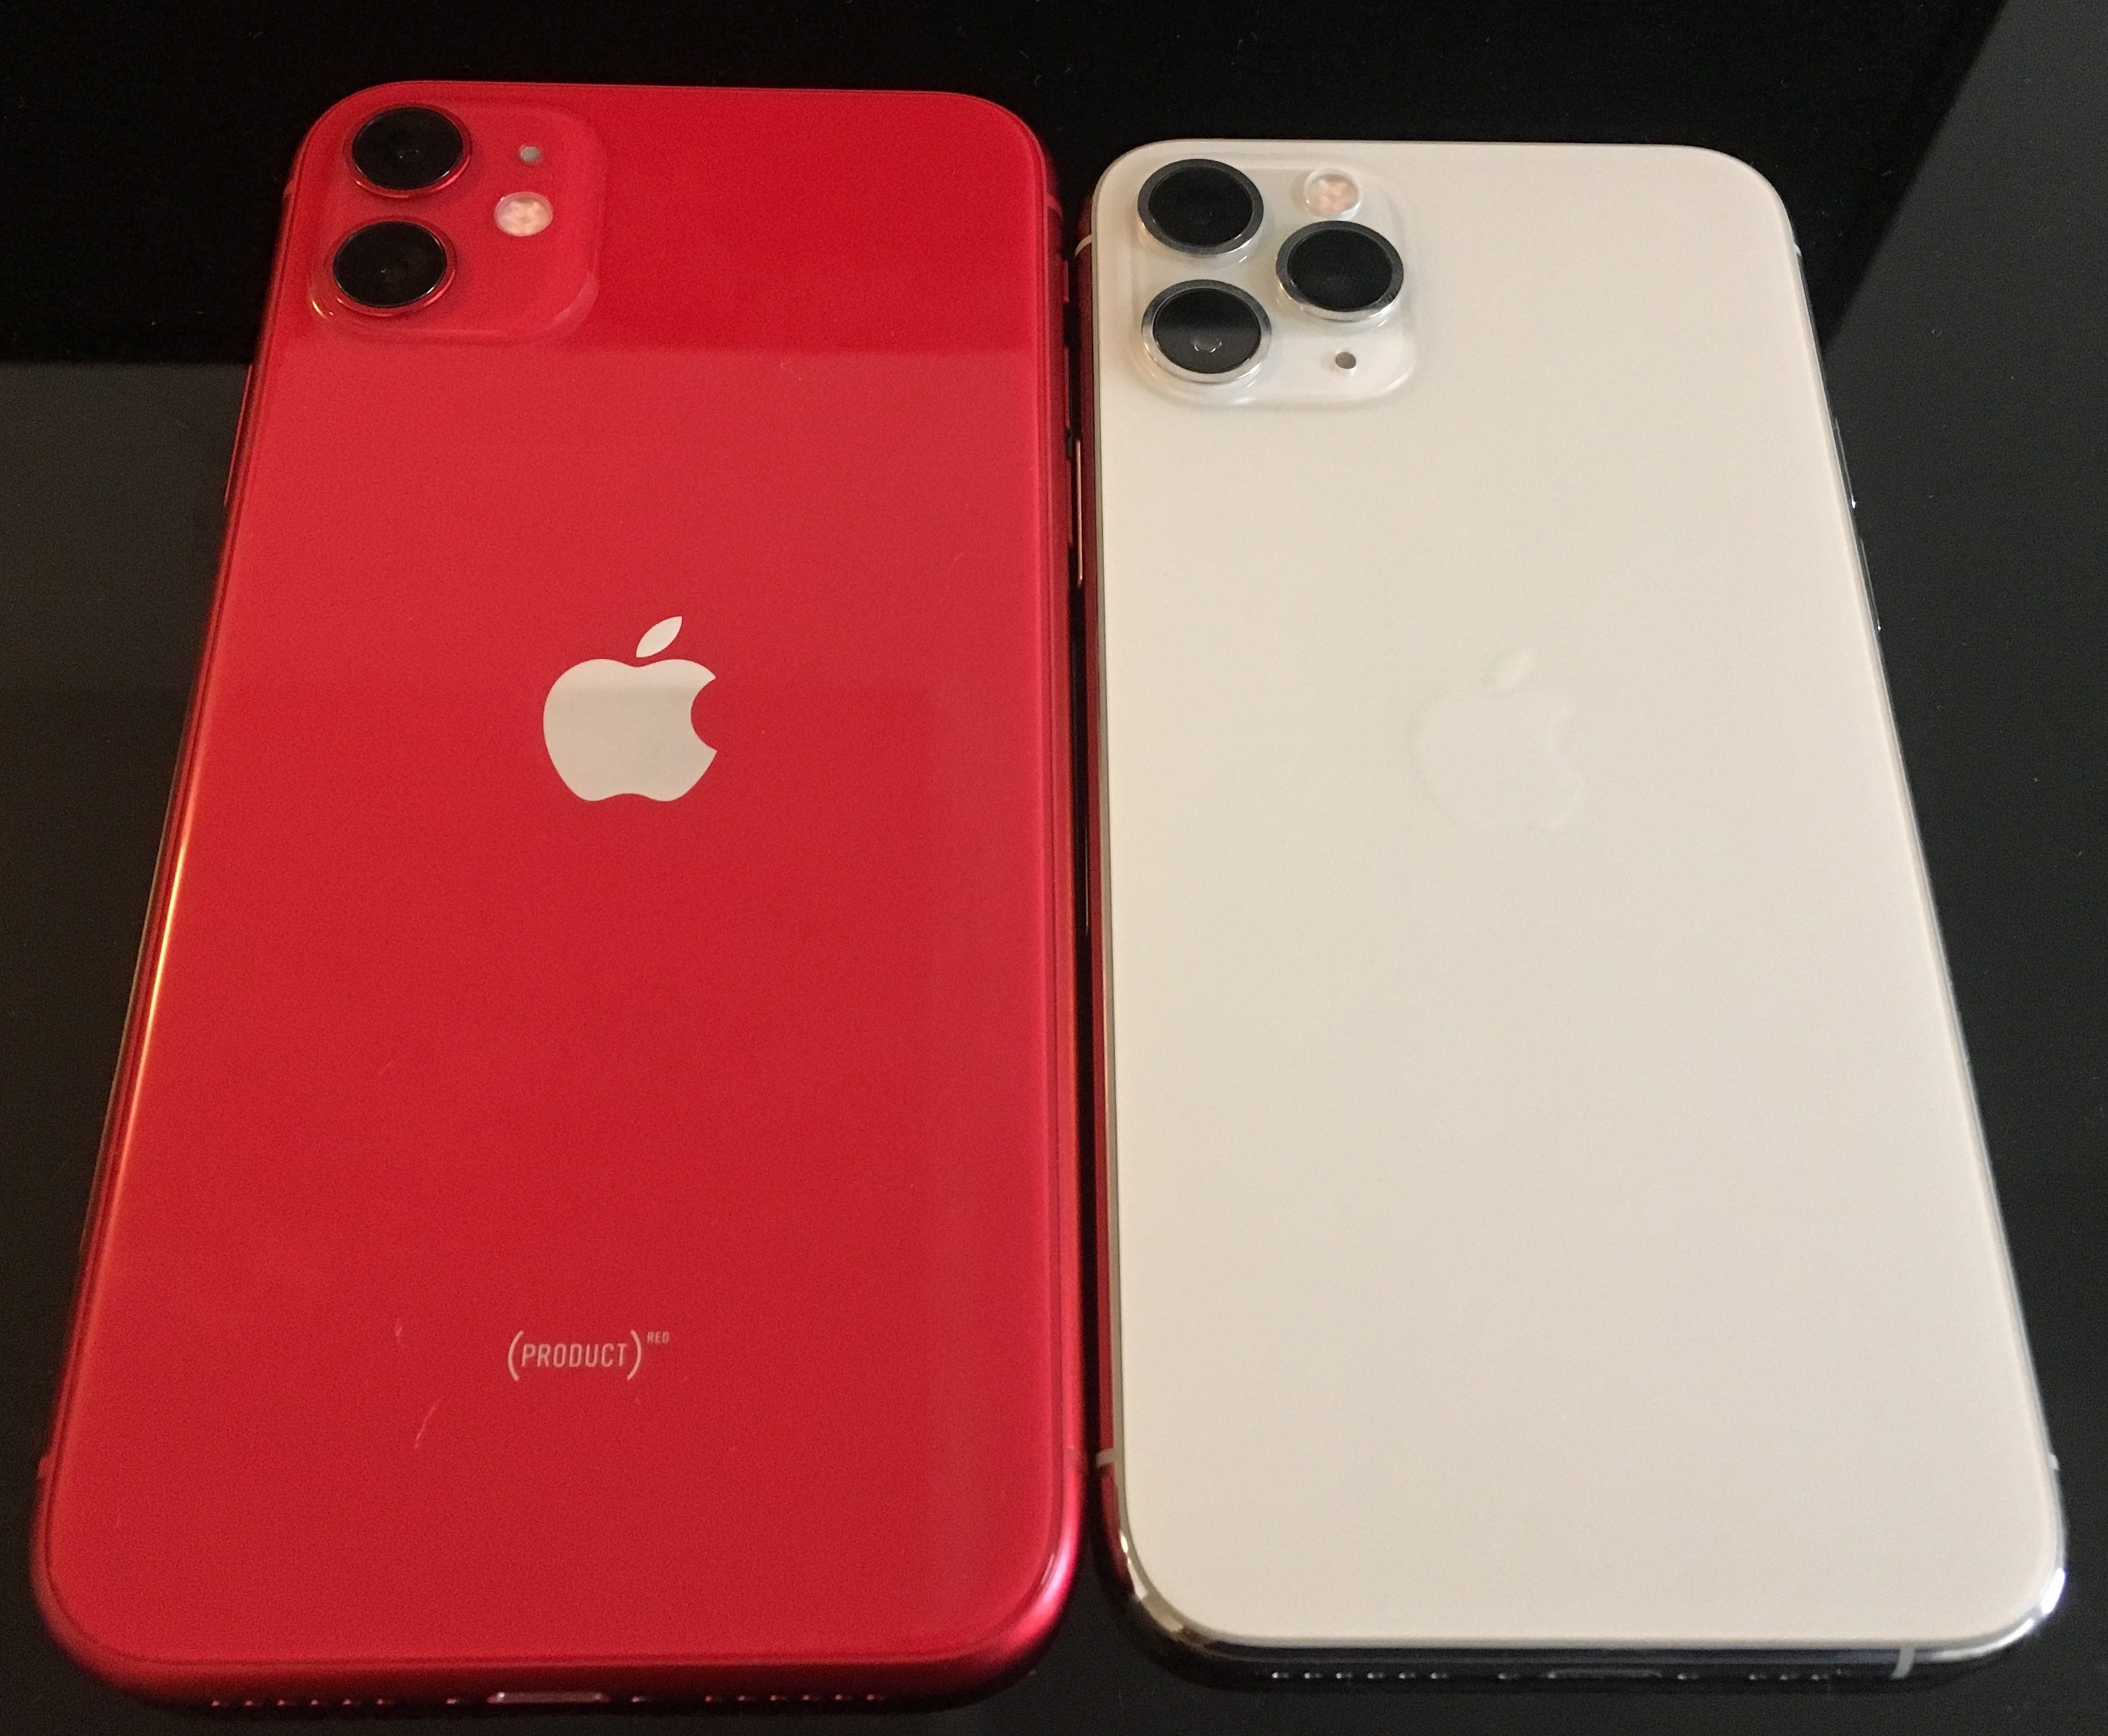 Iphone 11 Vs Iphone 11 Pro Why You Should Upgrade To Iphone 11 But Skip The Pro And Save 300 By Jeff Chen Mission Org Medium